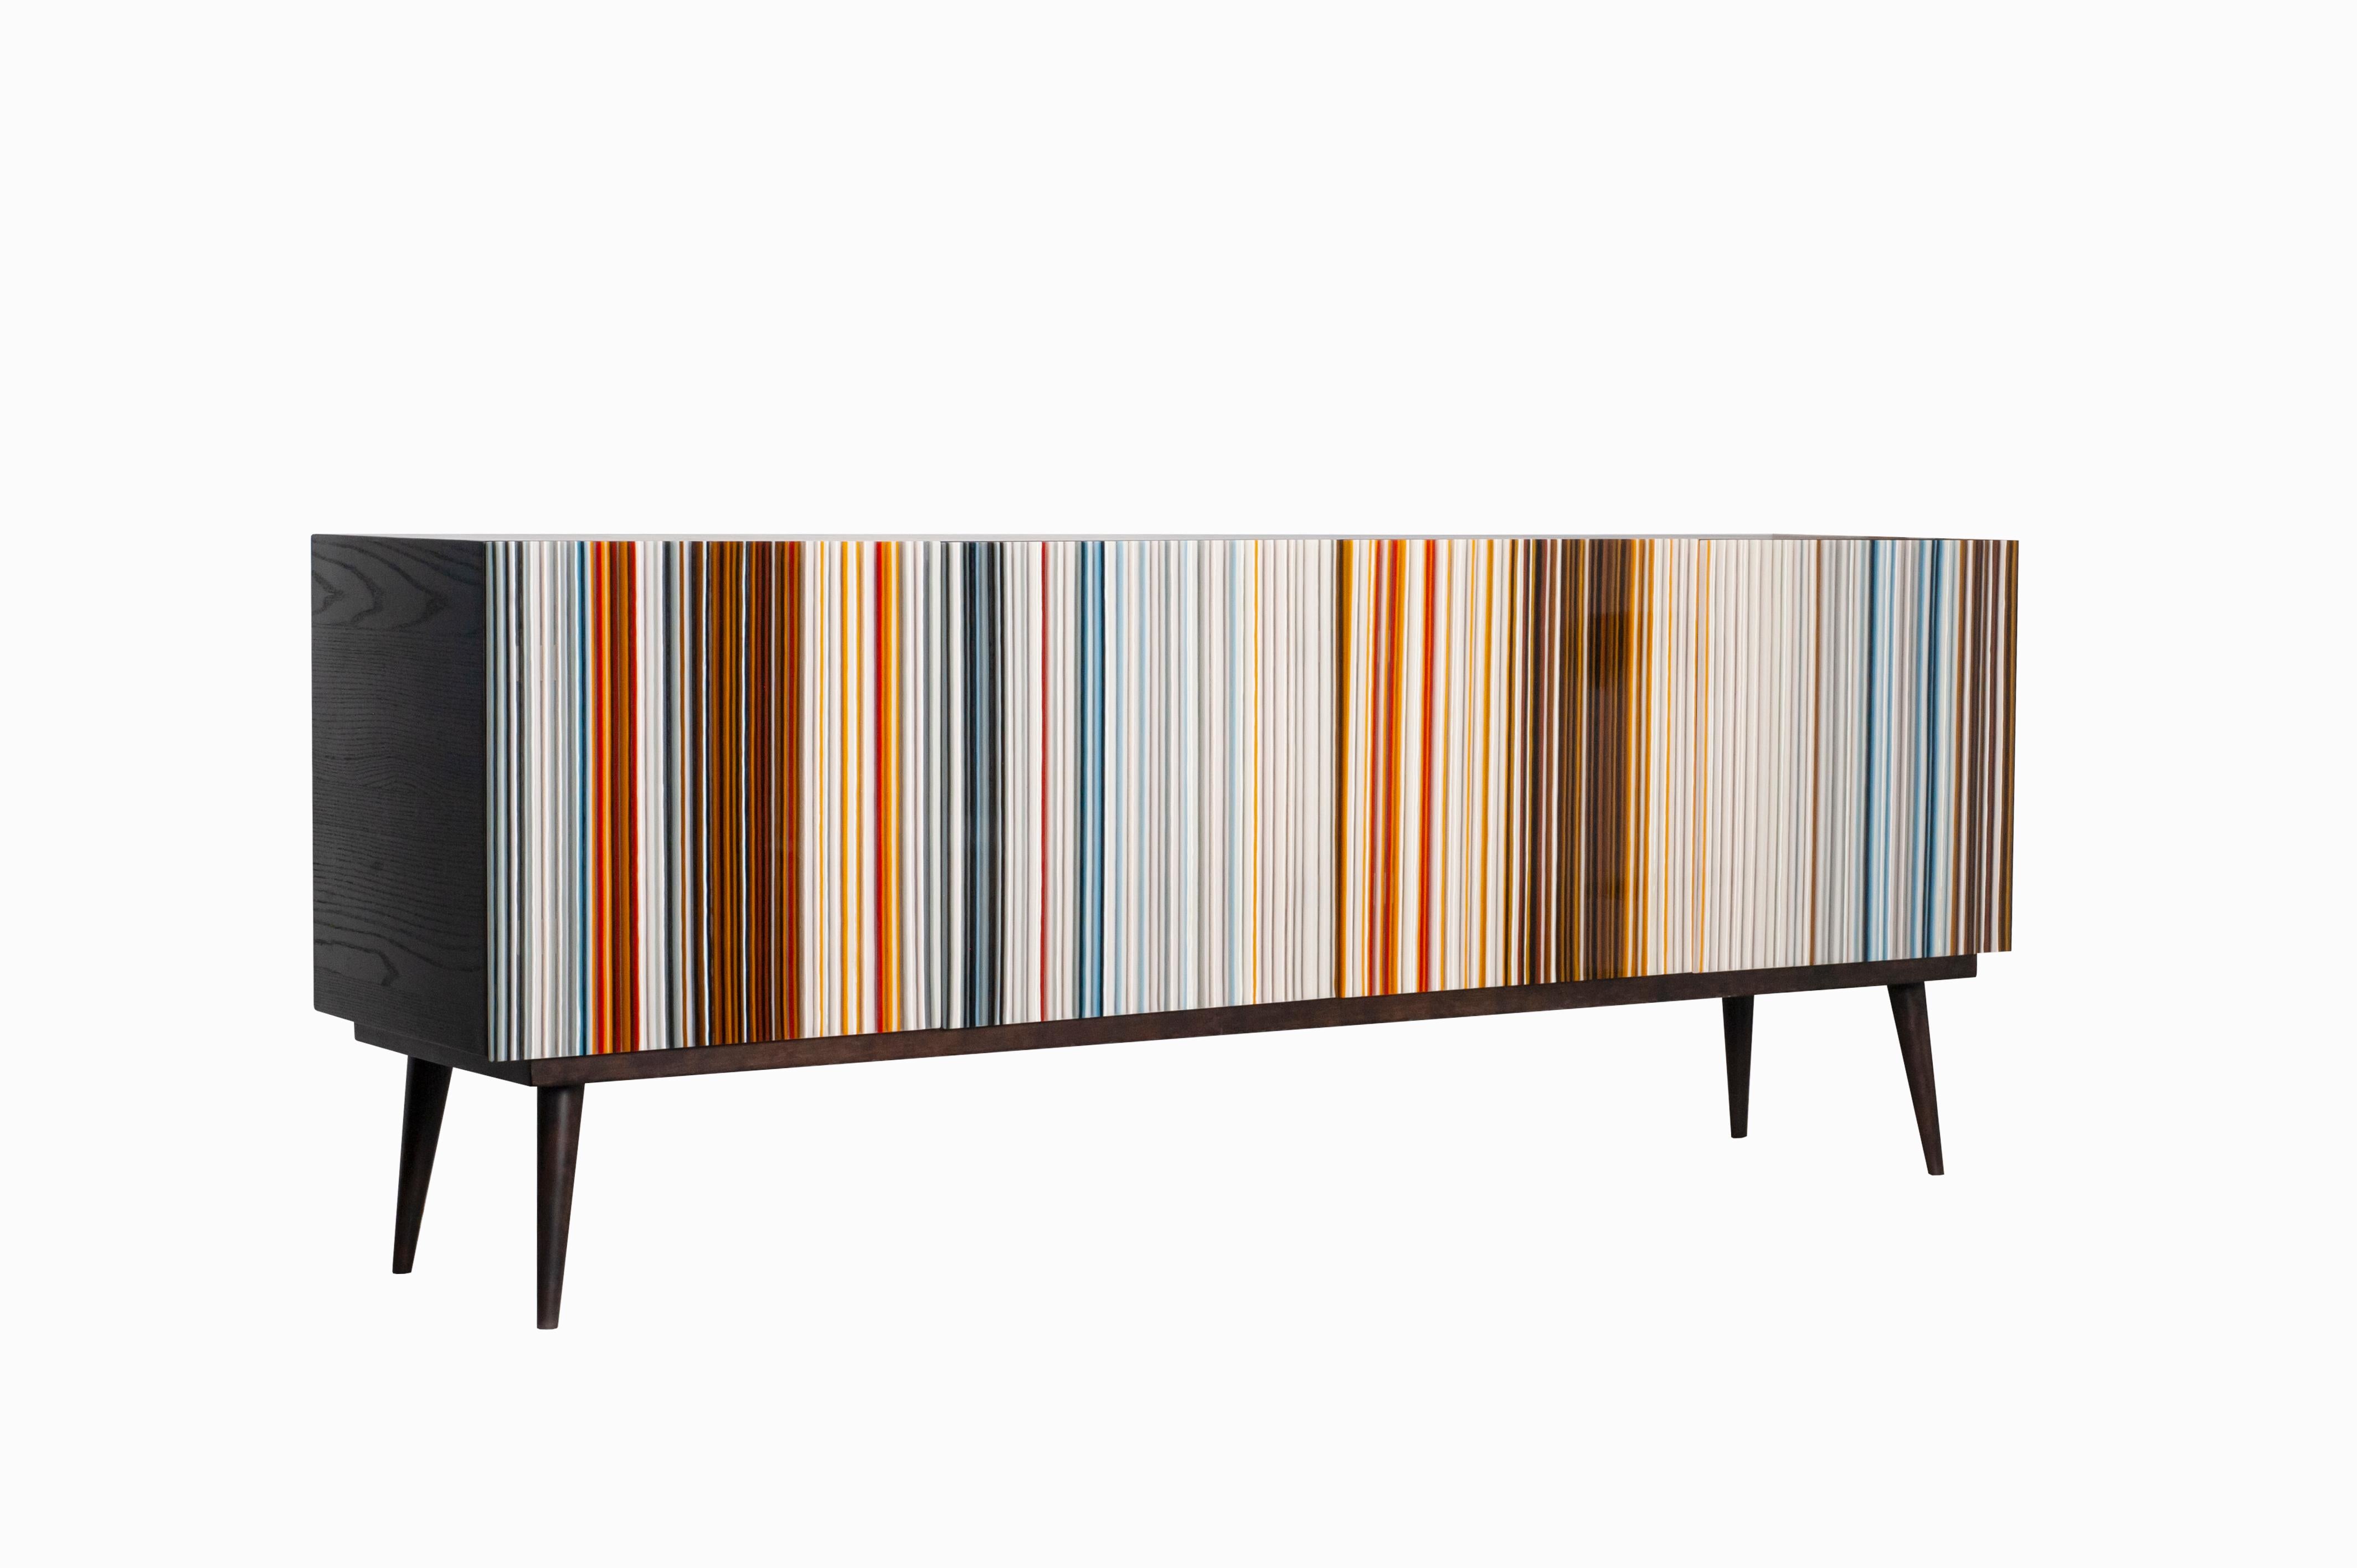 Credenza designed by Orfeo Quagliata in collaboration with Taracea Furniture. An object of fused glass created with the exclusive barcode technique. The Buff-Hey´s retro design mixed with designer's exceptional glass expertise put together a cutting